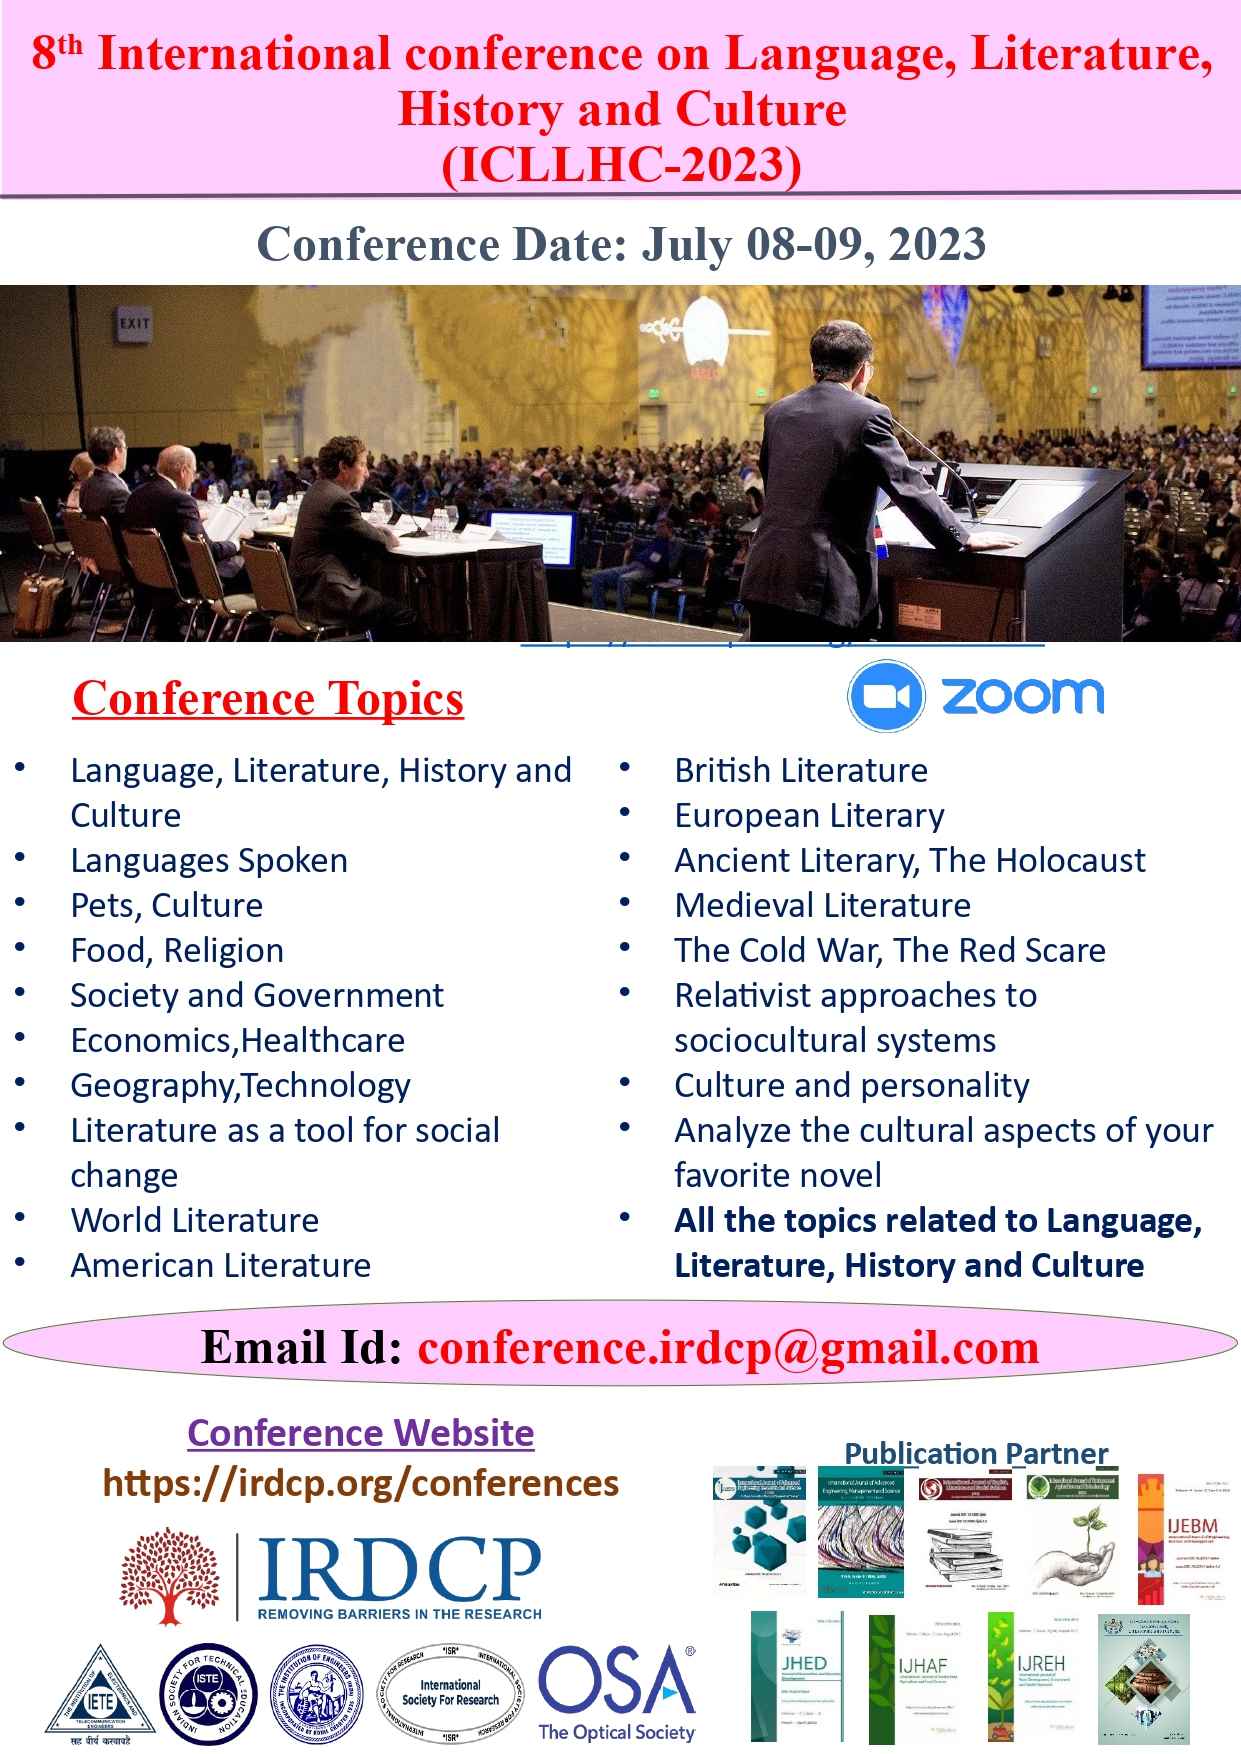 8th International conference on Language, Literature, History and ...